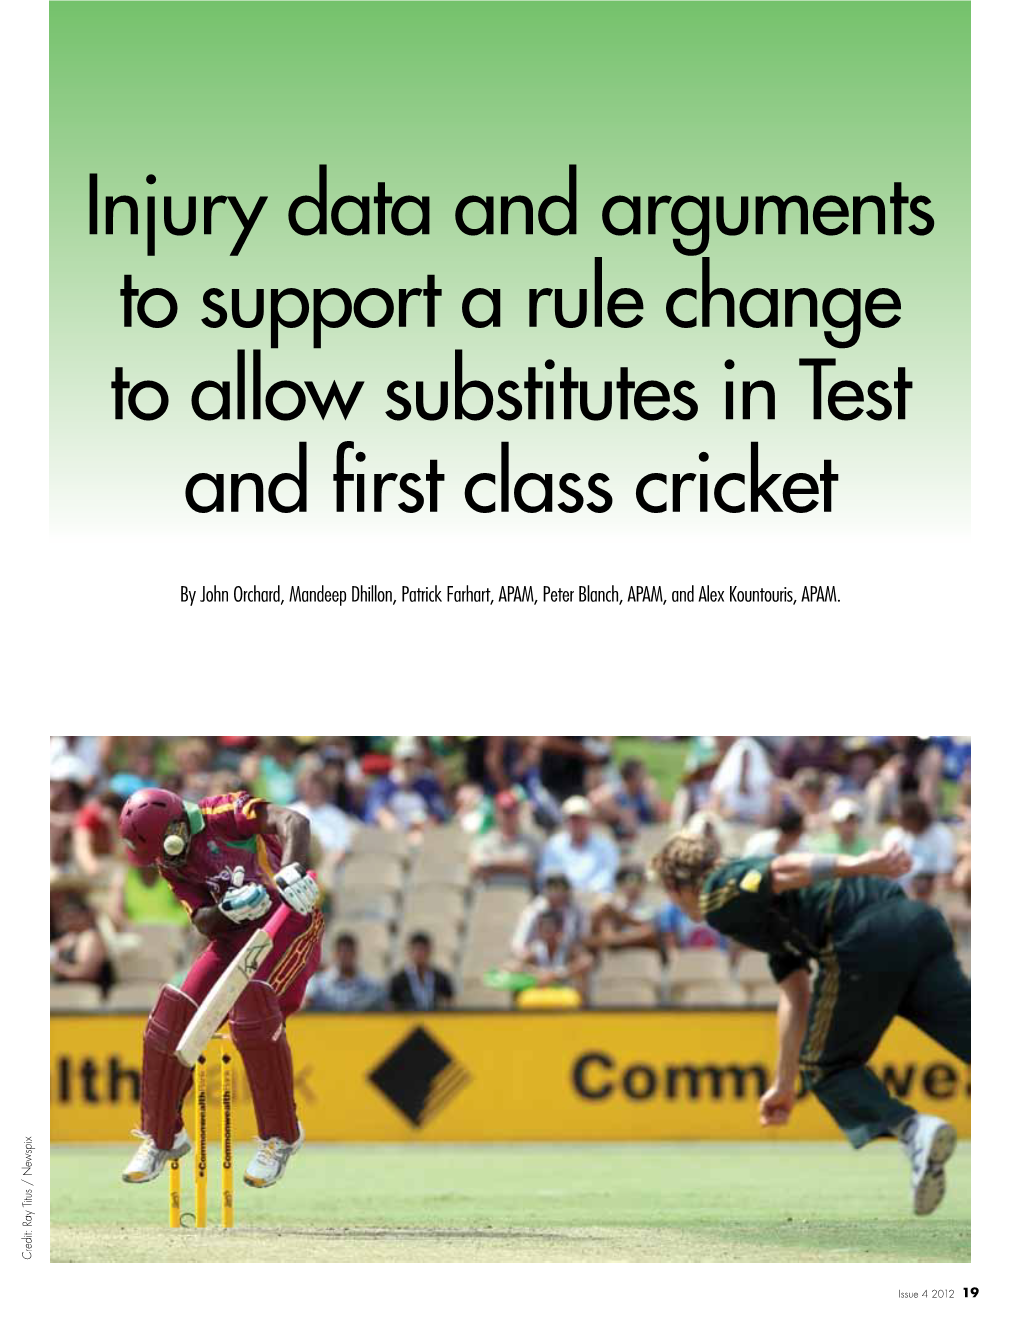 Injury Data and Arguments to Support a Rule Change to Allow Substitutes in Test and First Class Cricket